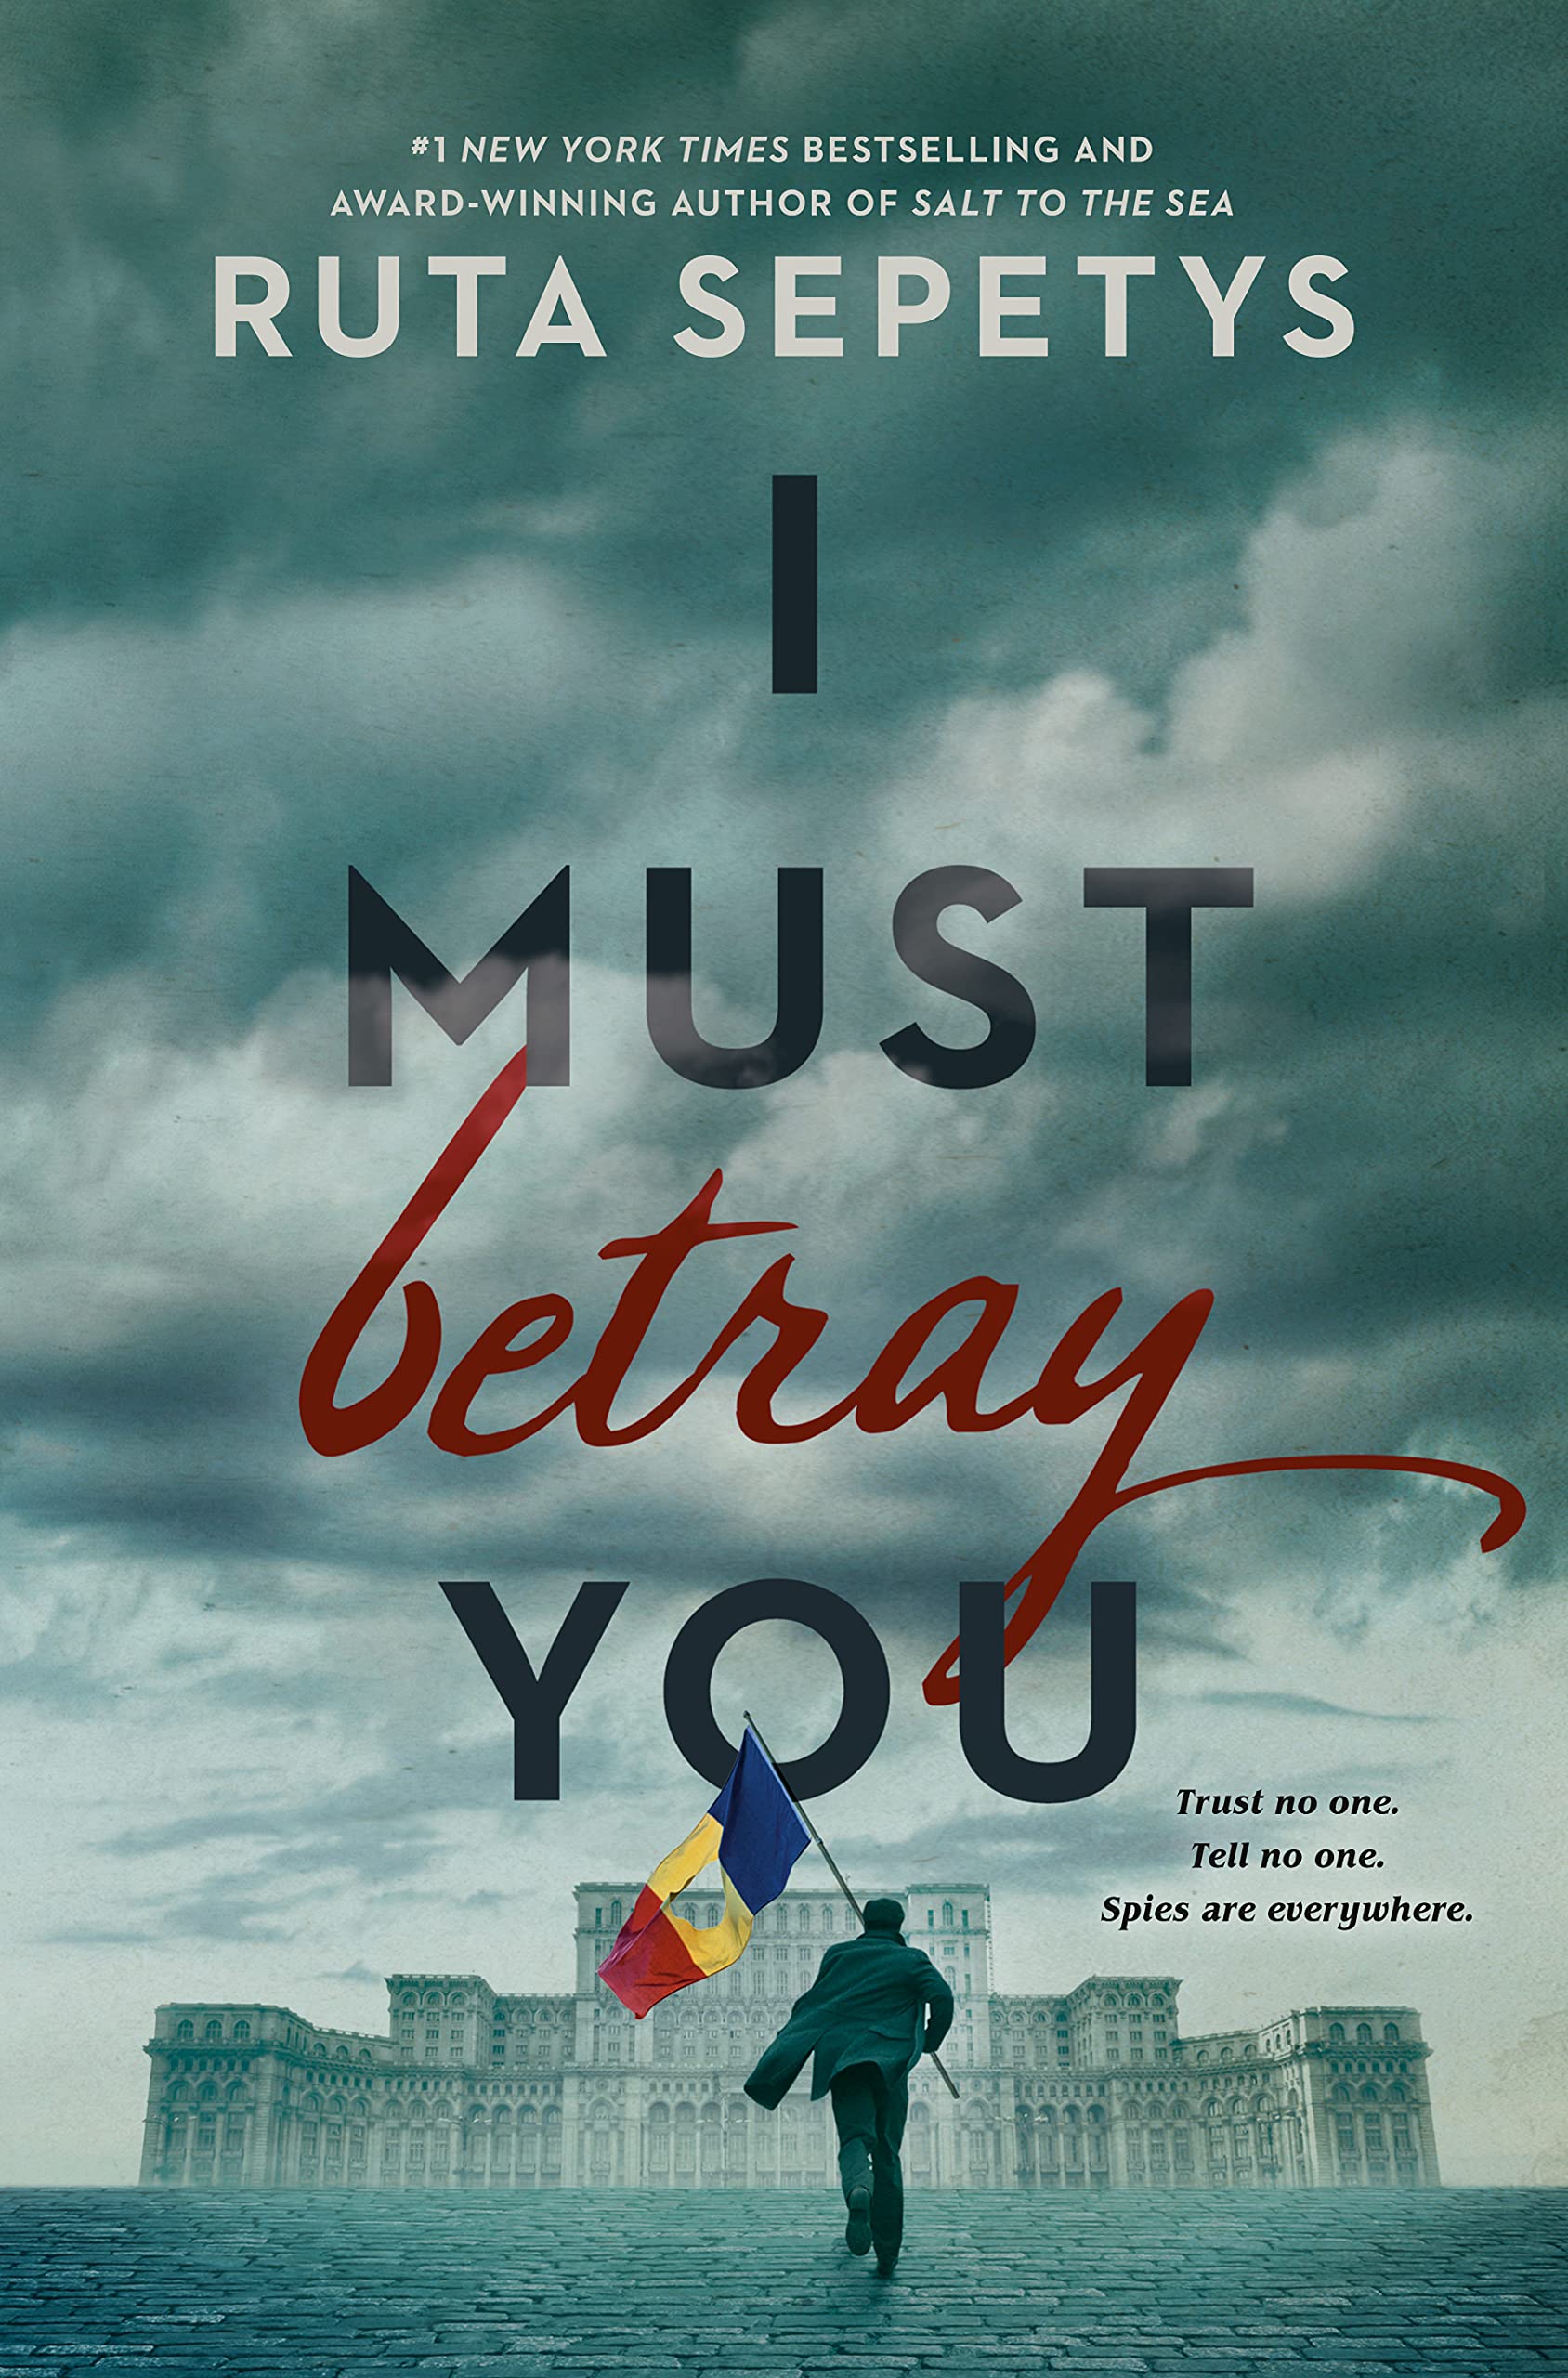 Cover of “I Must Betray You” by Ruta Sepetys